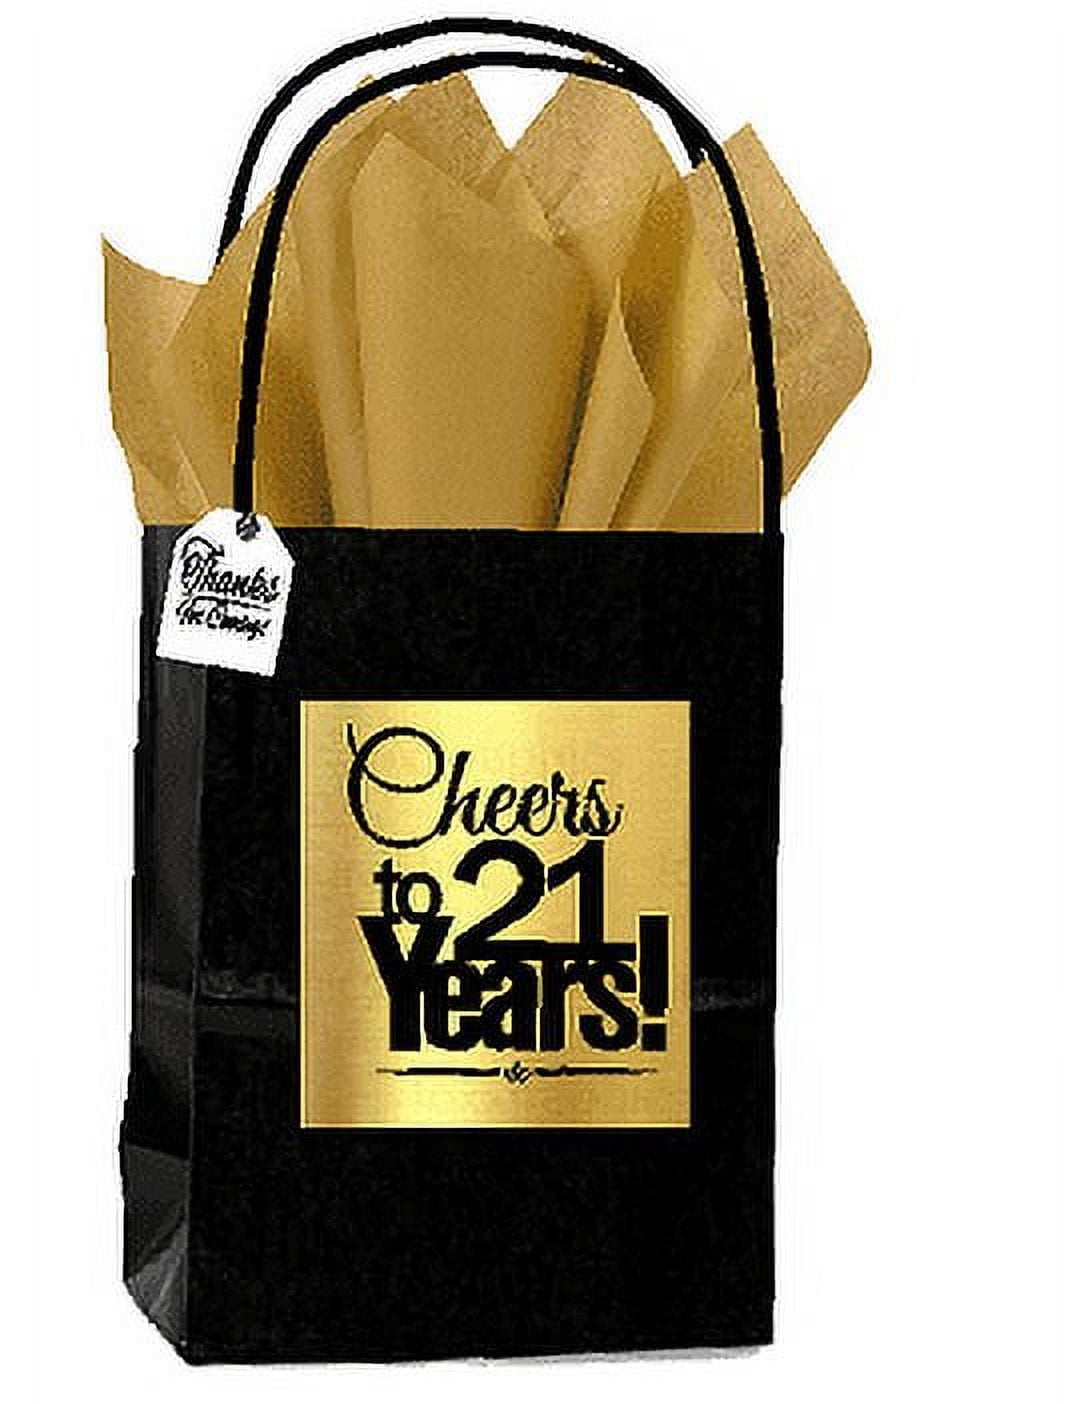 Black & Gold 21st Birthday / Anniversary Cheers Themed Small Party Favor Gift Bags with Tags -12pack